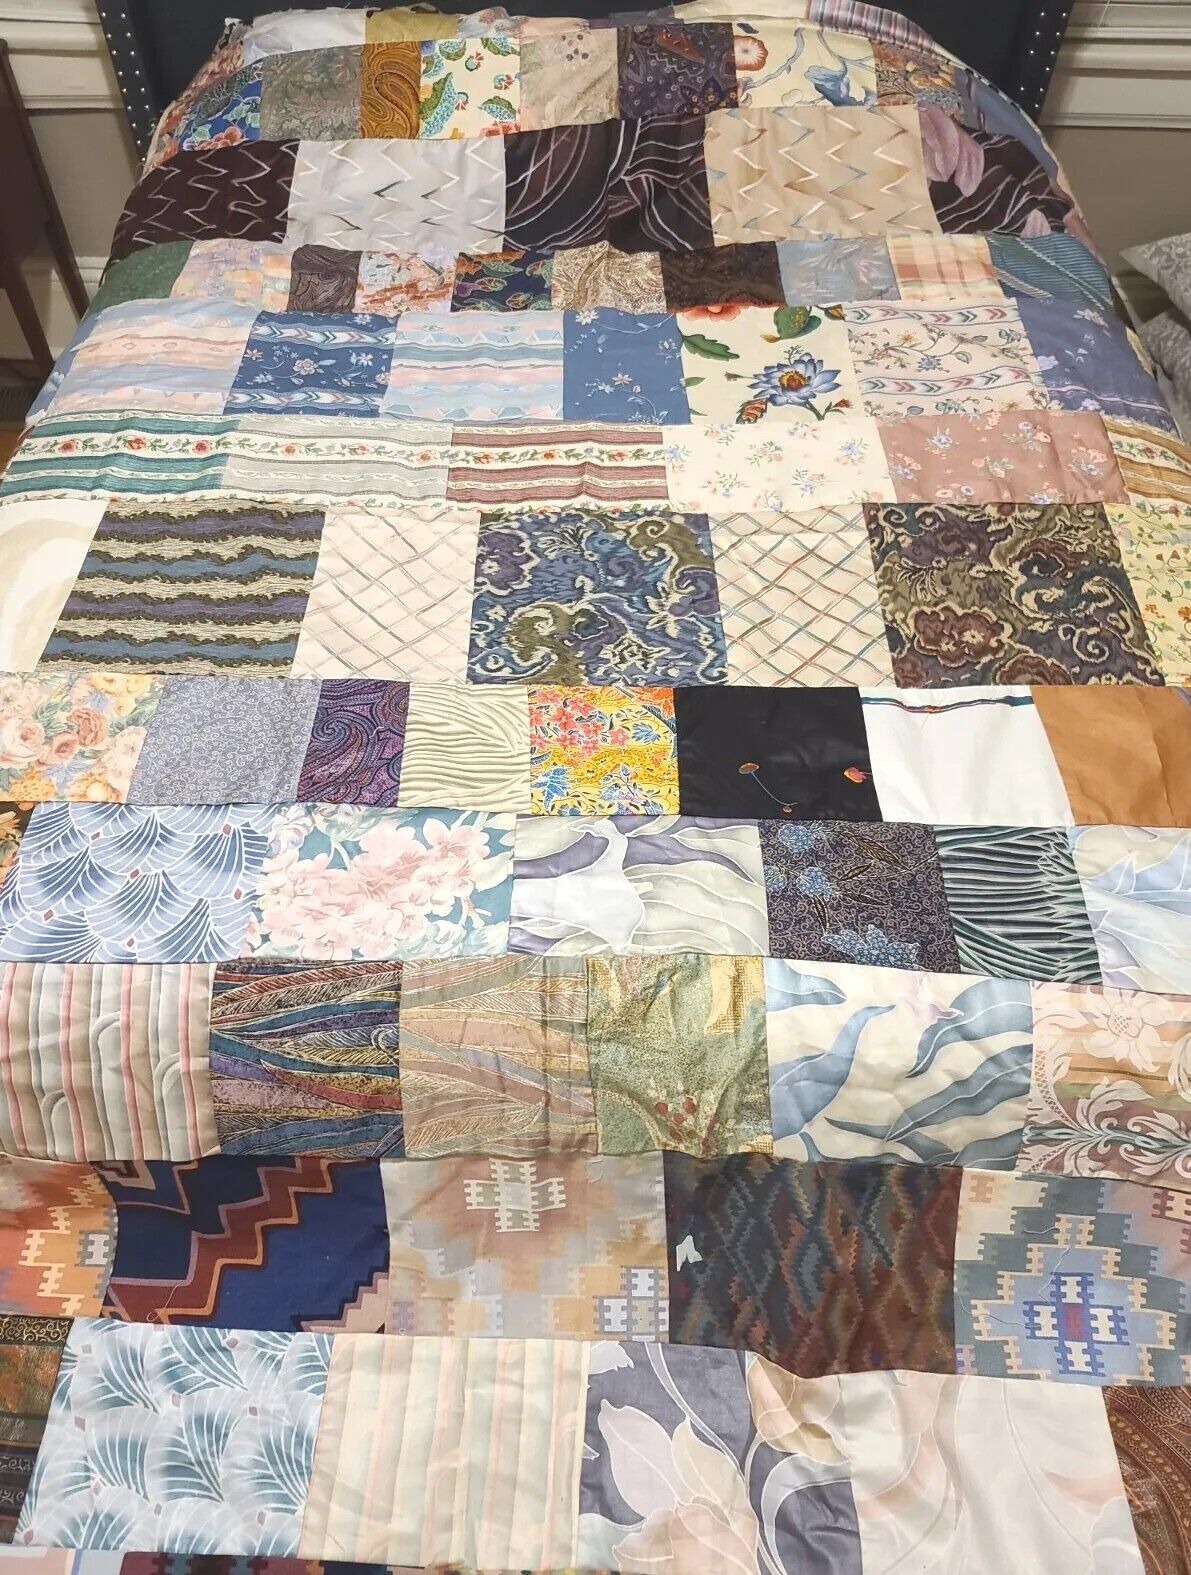 Large Handmade Quilt Top From Alabama Interesting Pattern 8\' × 8\' Unfinished